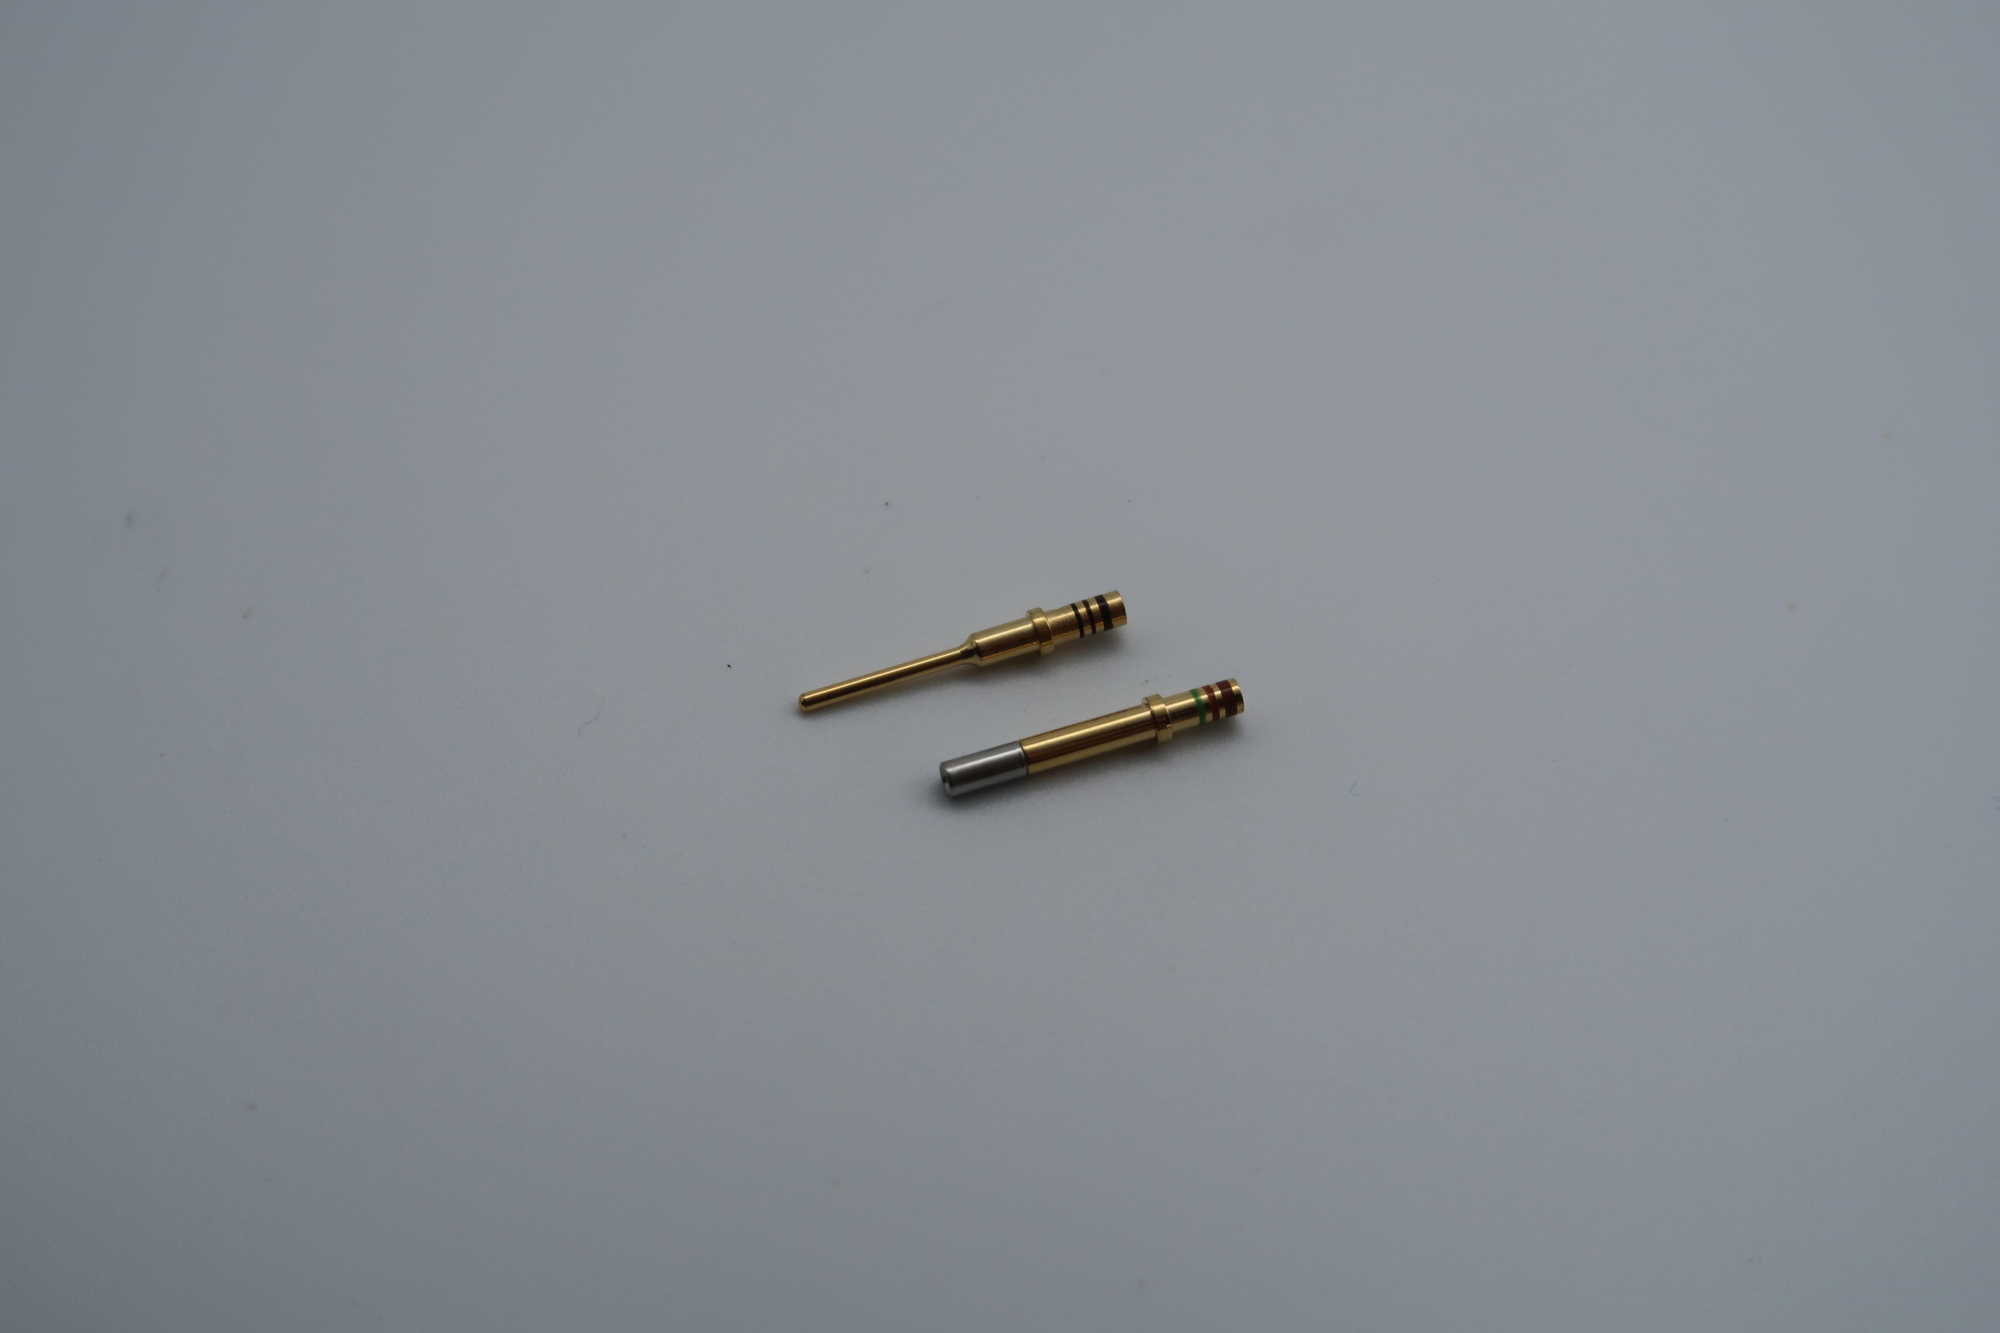 DTM GOLD PINS AND SOCKETS 20# (25 PACK)